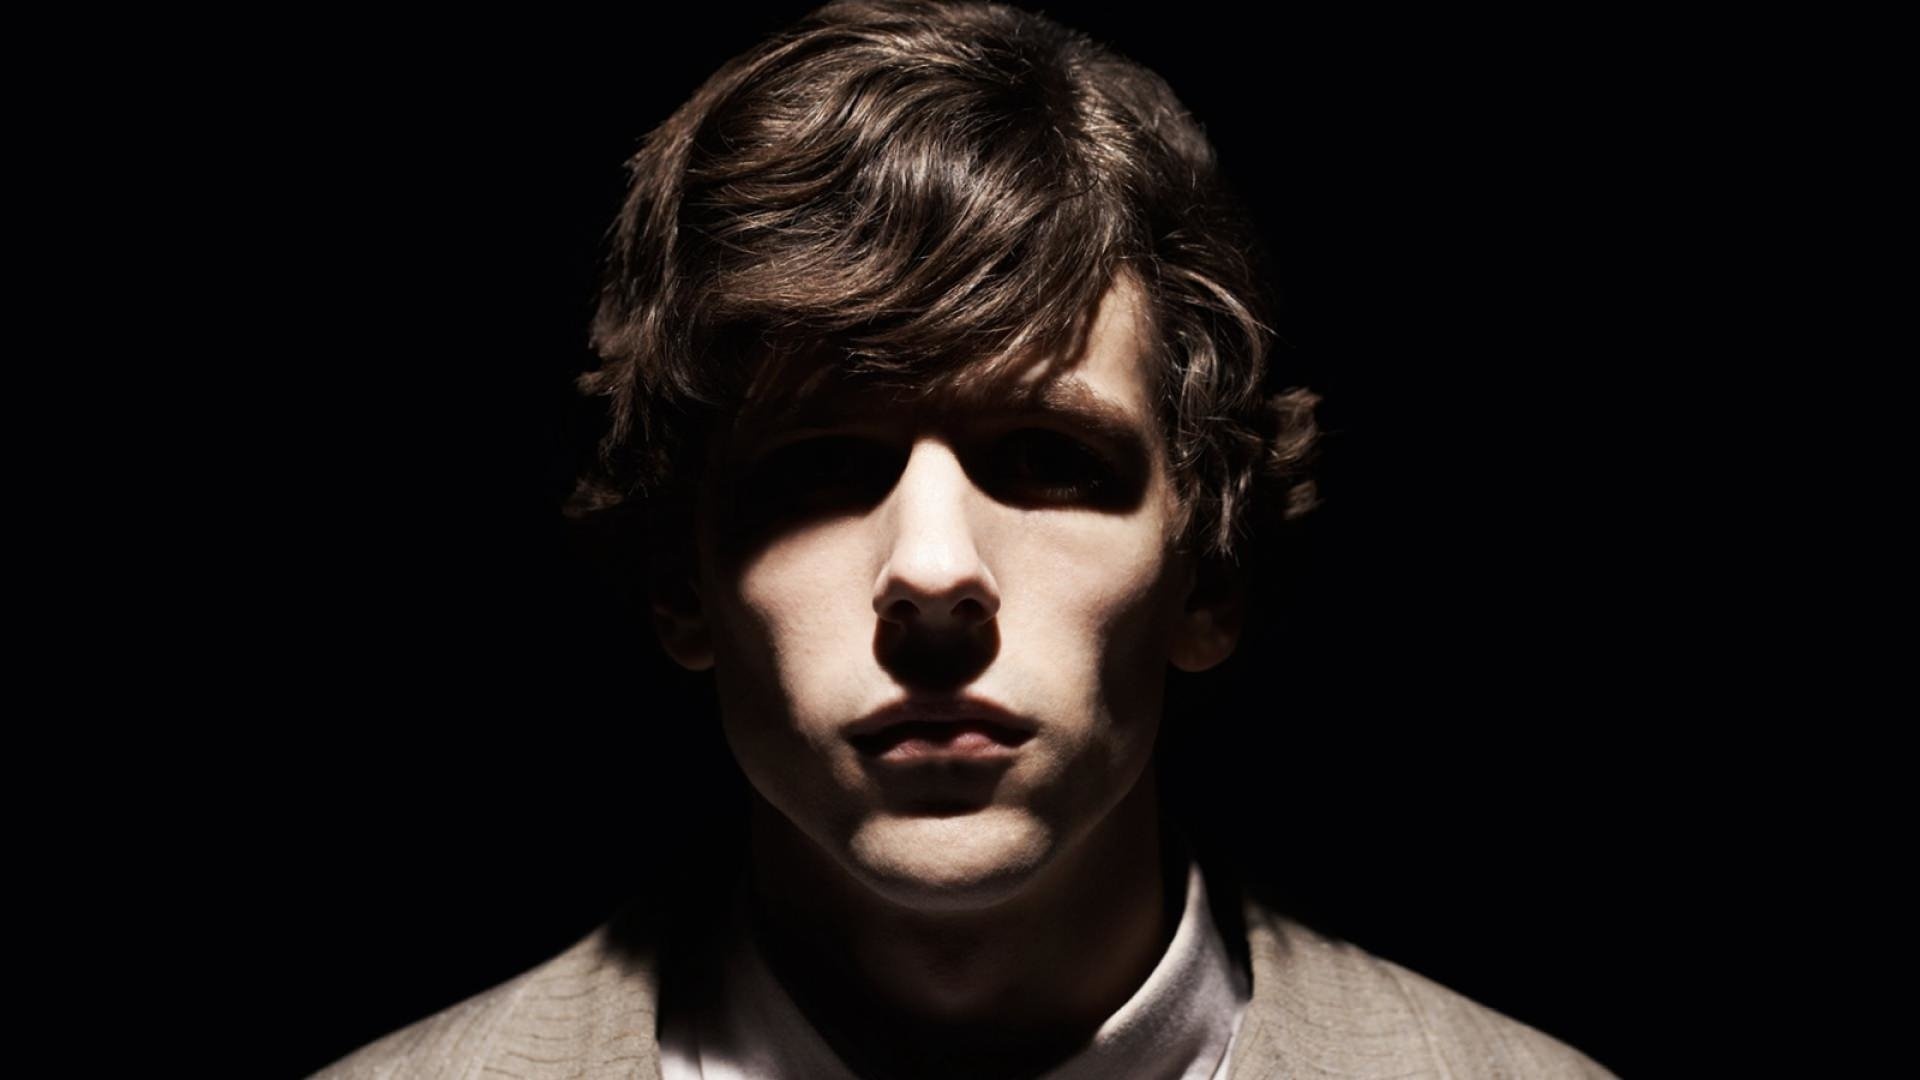 Jesse Eisenberg: Played Simon James in a 2013 British black comedy thriller film, The Double. 1920x1080 Full HD Background.